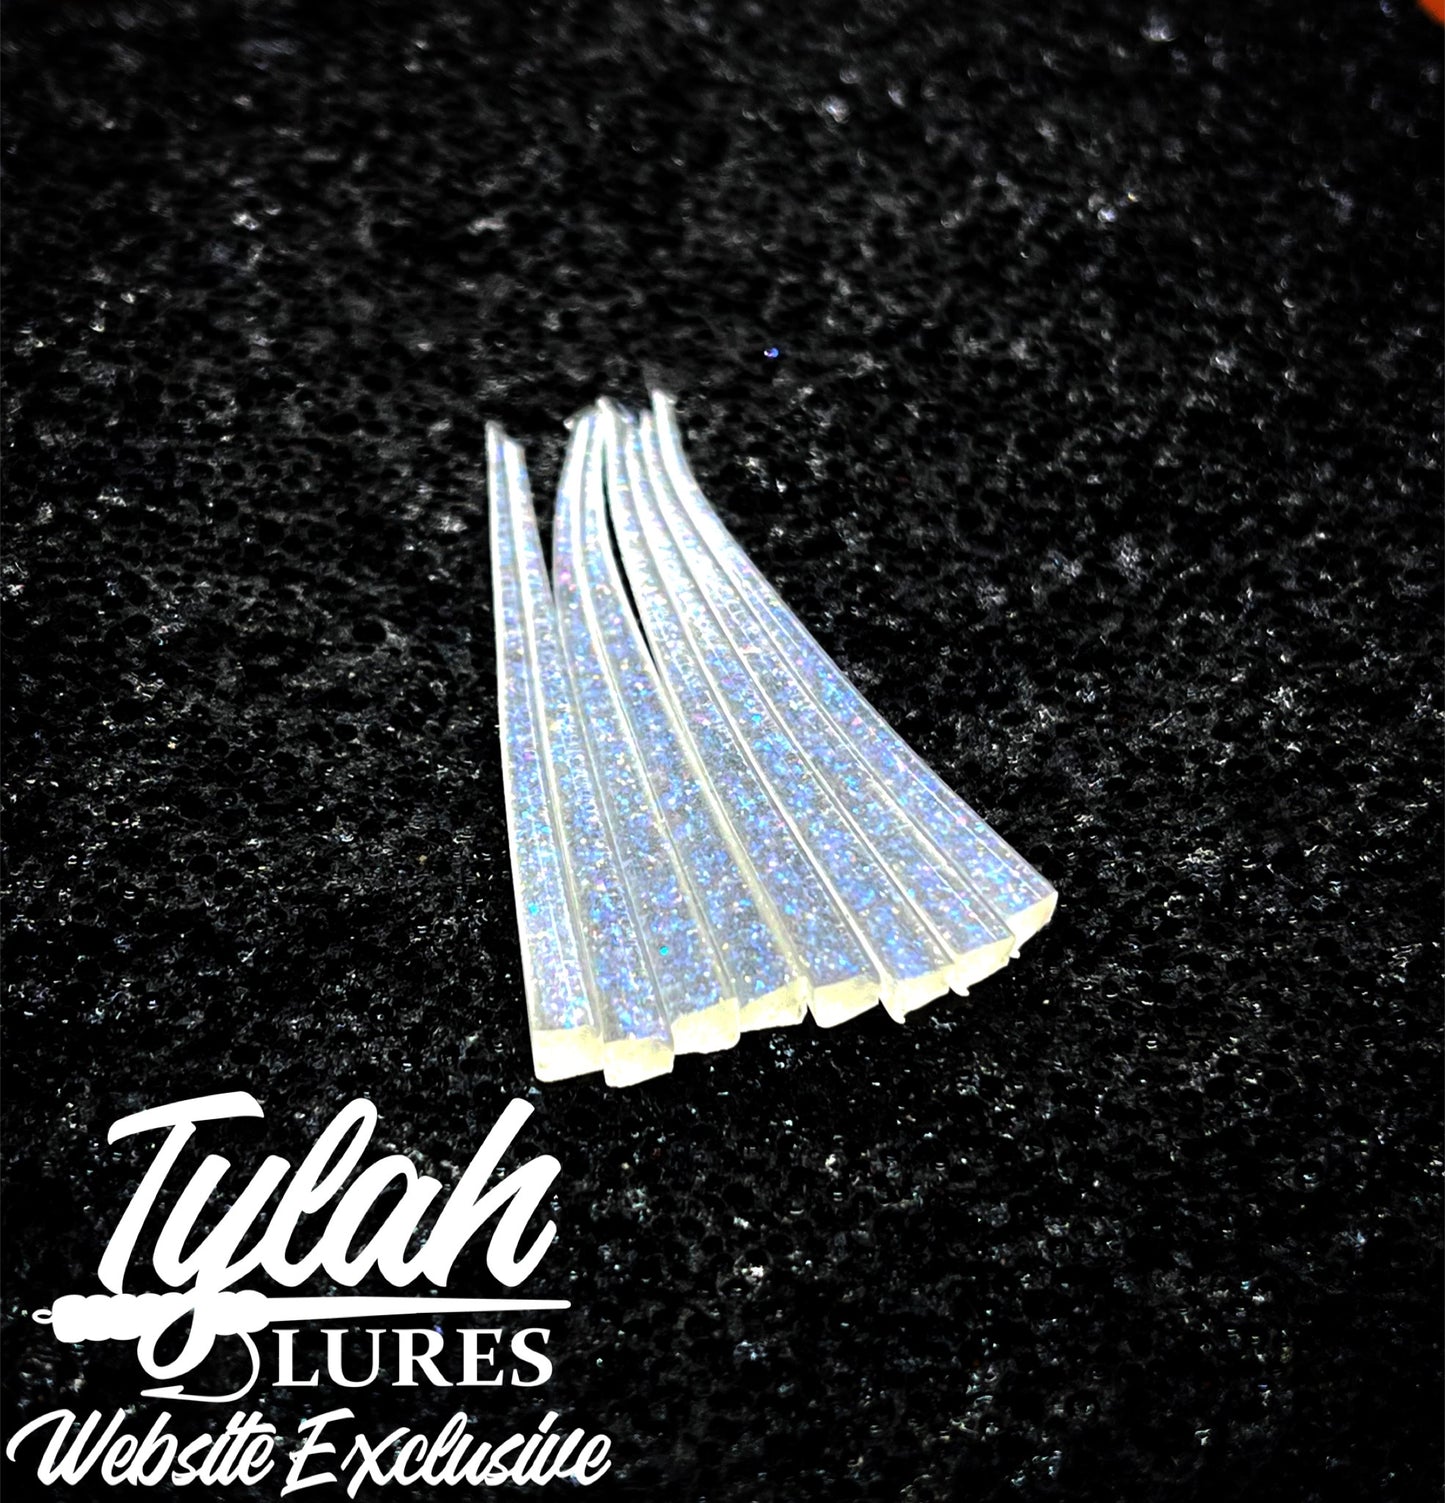 TylahLures Website Exclusive UV Blue Glow Strips 1.5in.